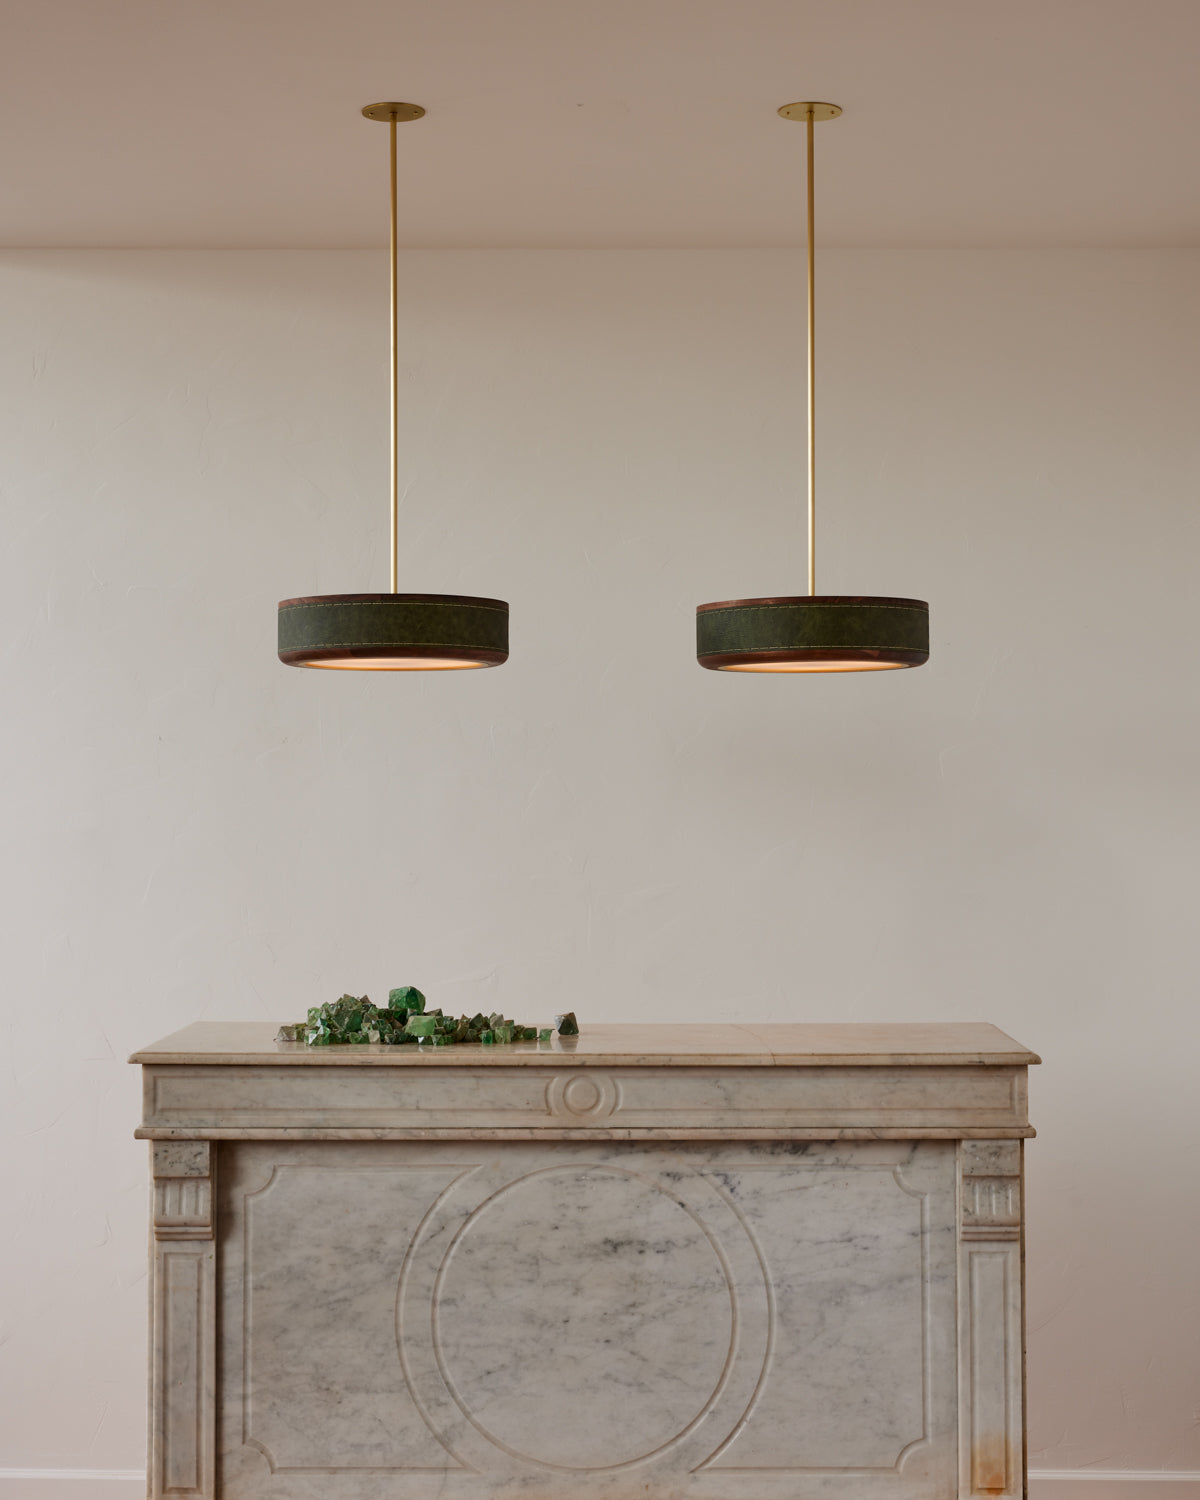 Robert True Ogden RTO Lighting 16" Nura Ceiling Fixture Pendant - Juniper Leather - Styled Shot Featuring Two Pendant Over a Marble Counter Top Bar#leather_juniper